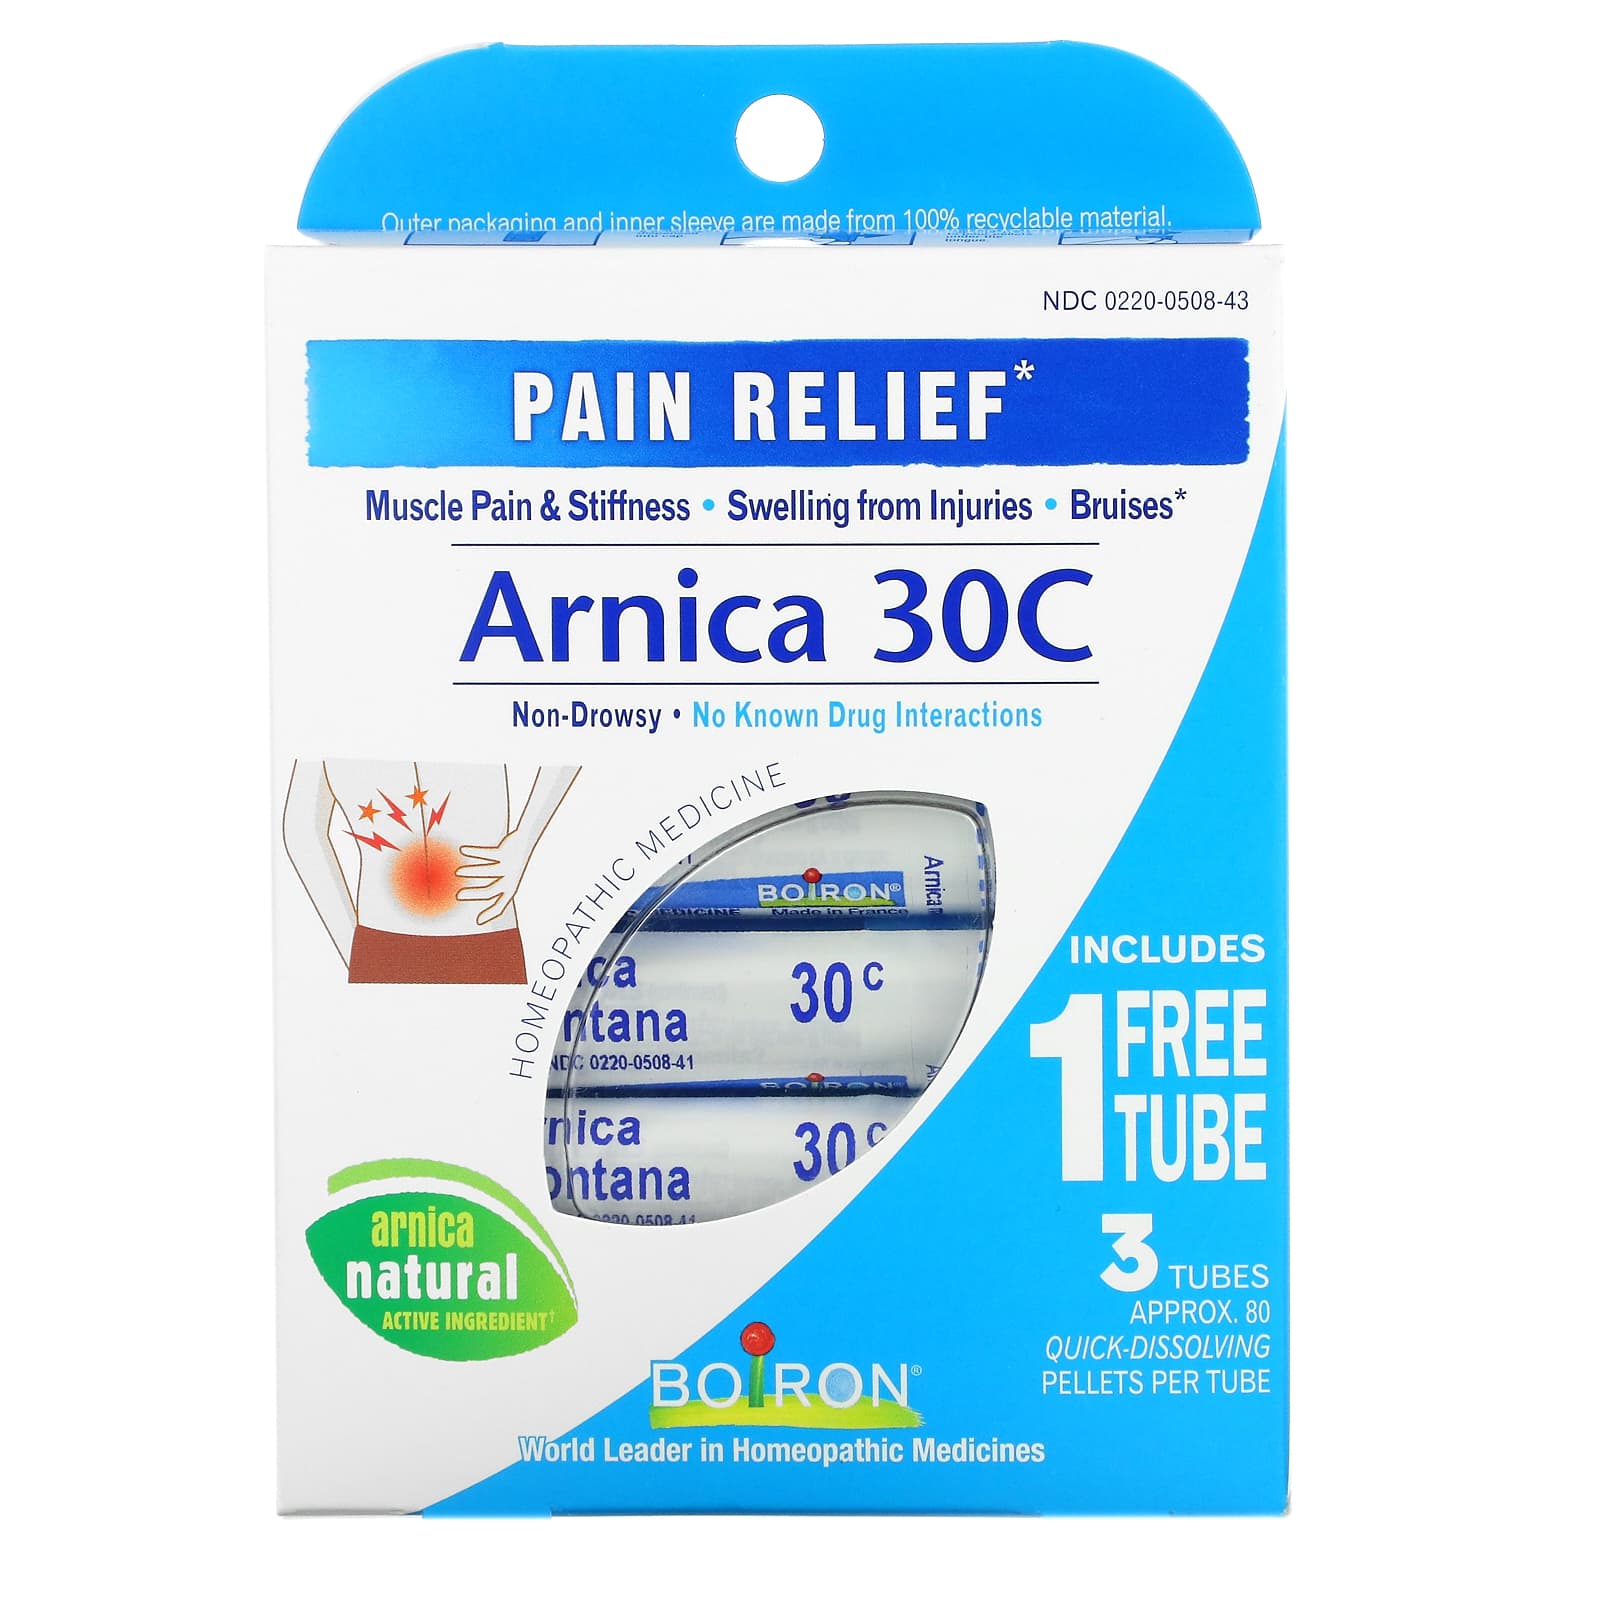 Boiron, Single Remedies, Arnica, Pain Relief, 30C, 3 Tubes, Approx